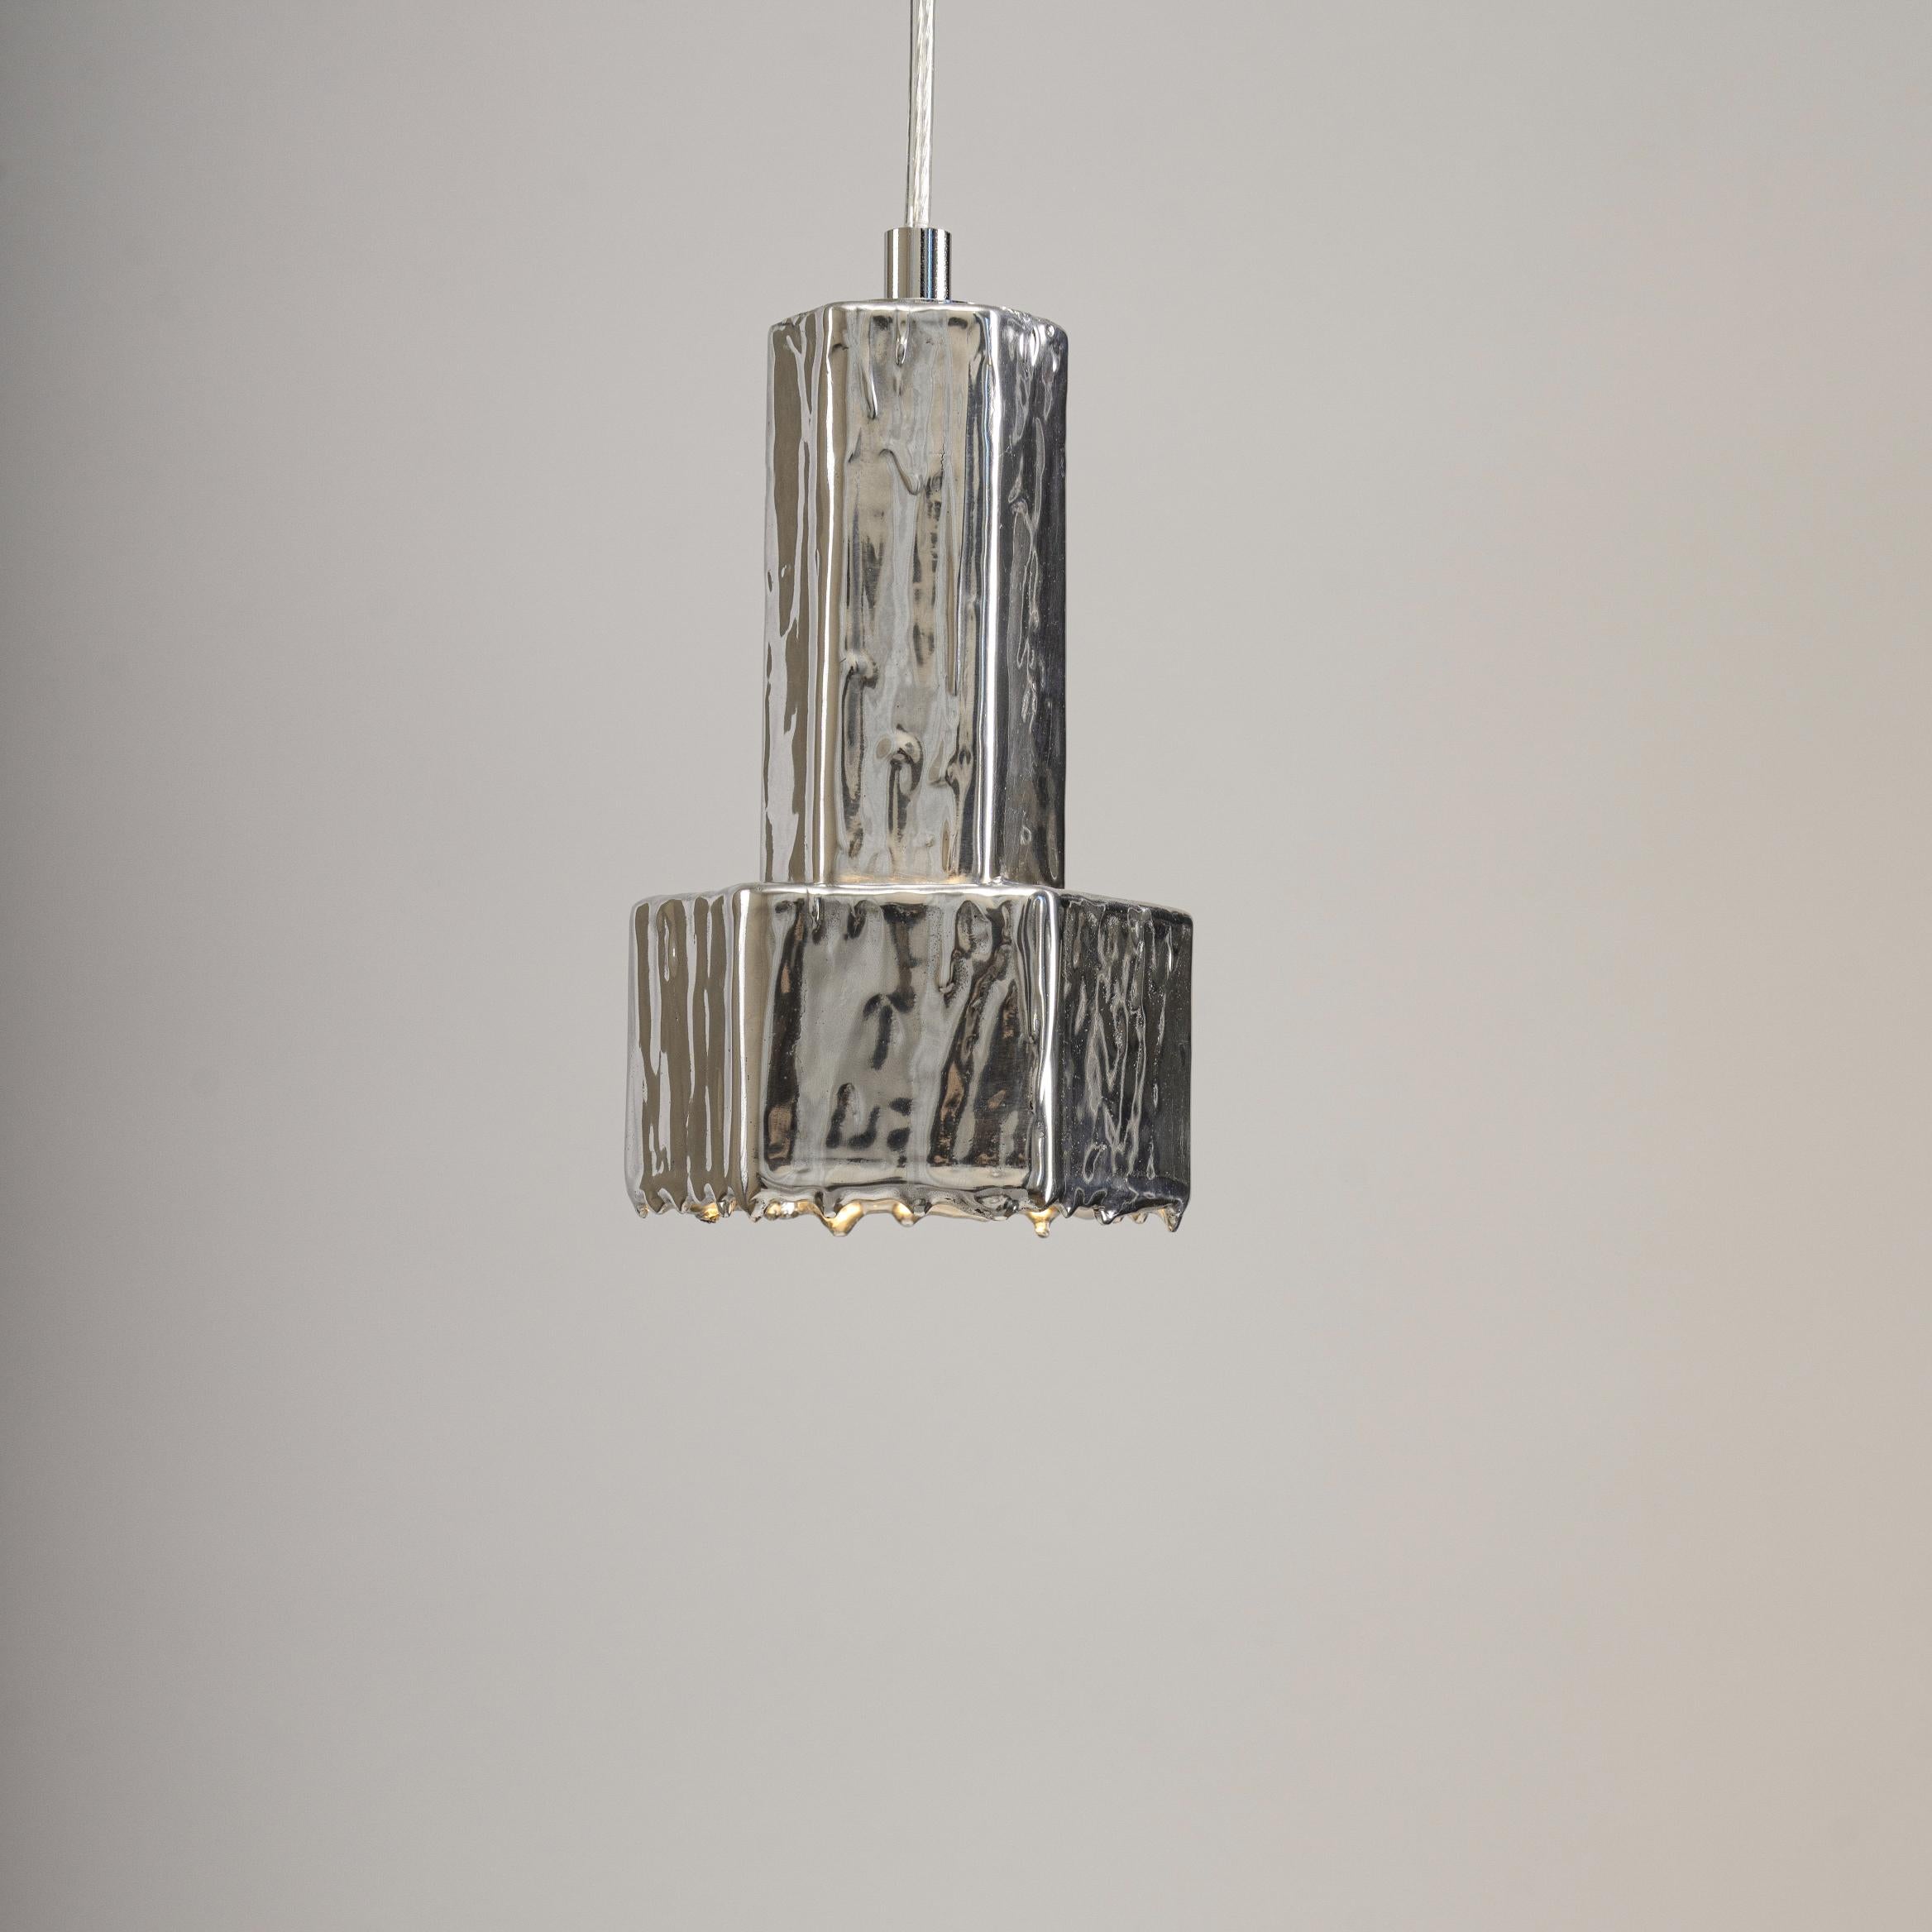 Lost Pendant 6 Lamp by Studio Birtane
Dimensions:  W 13 x D 13 x H 20 cm
Materials: Cast Aluminium
Cast Bronze version and Polished or Patinated finishes are also available.

All our lamps can be wired according to each country. If sold to the USA